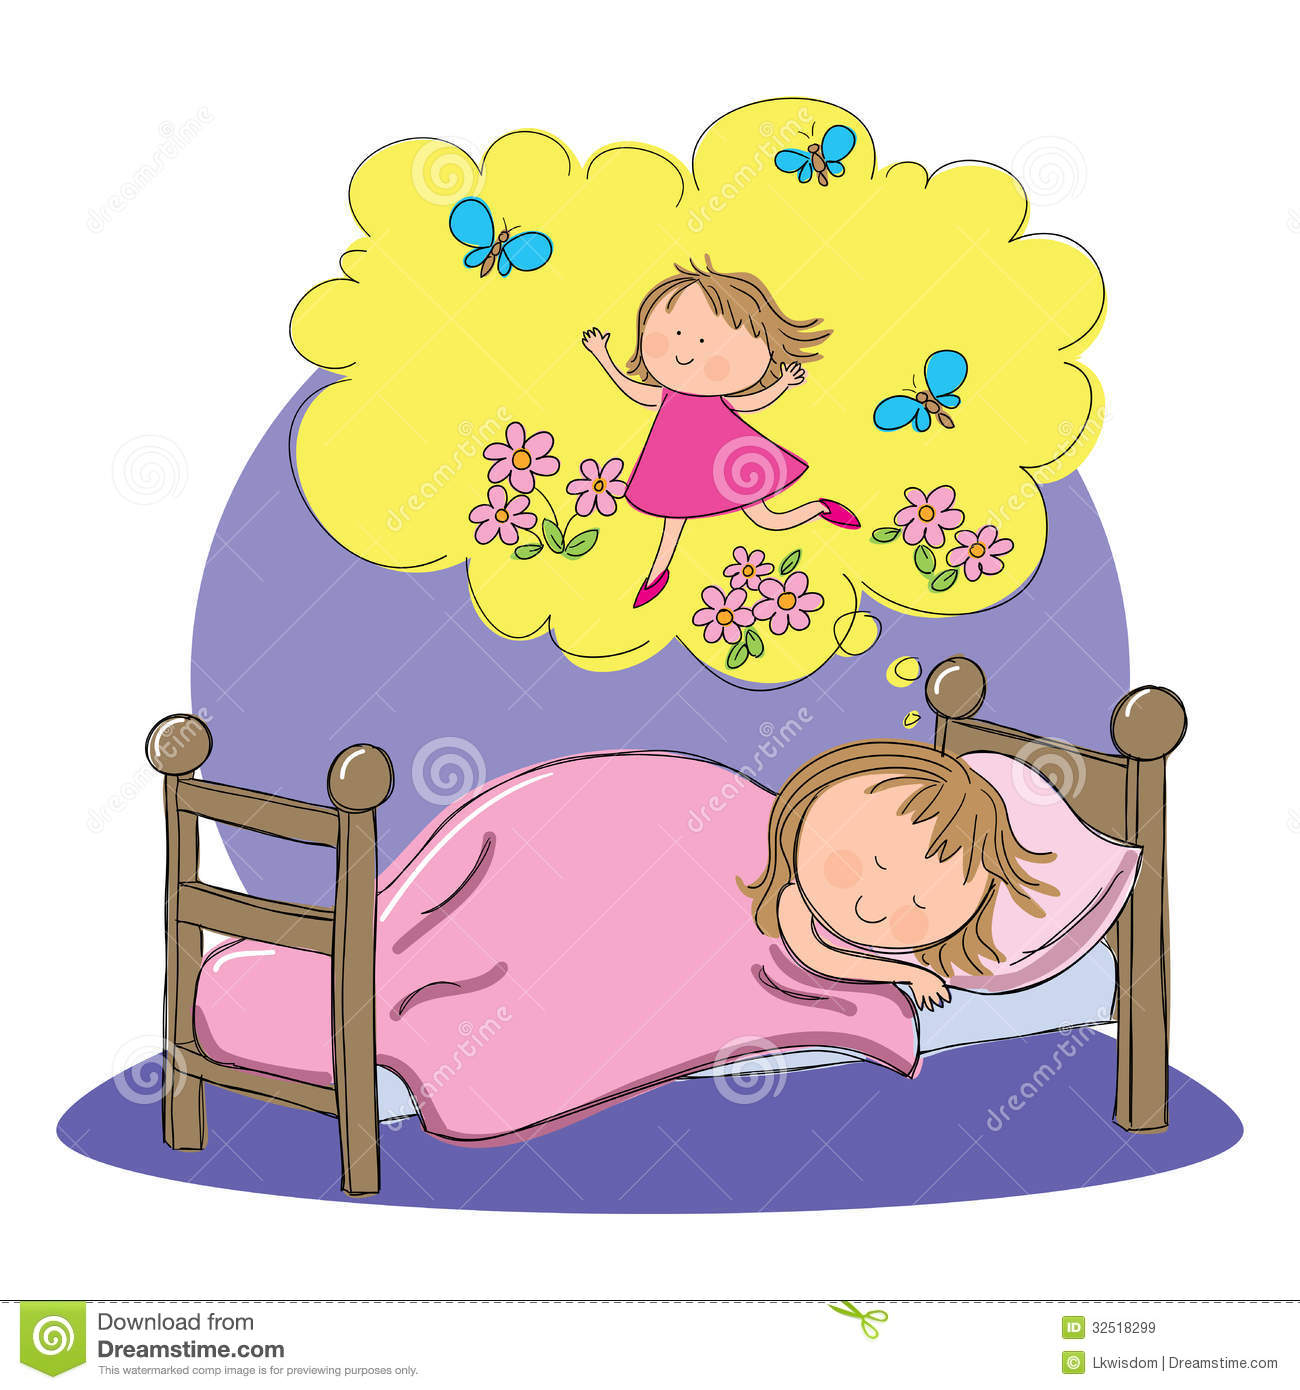 Picture Of Child Dreaming Happy Thoughts Illustrated In A Clipart